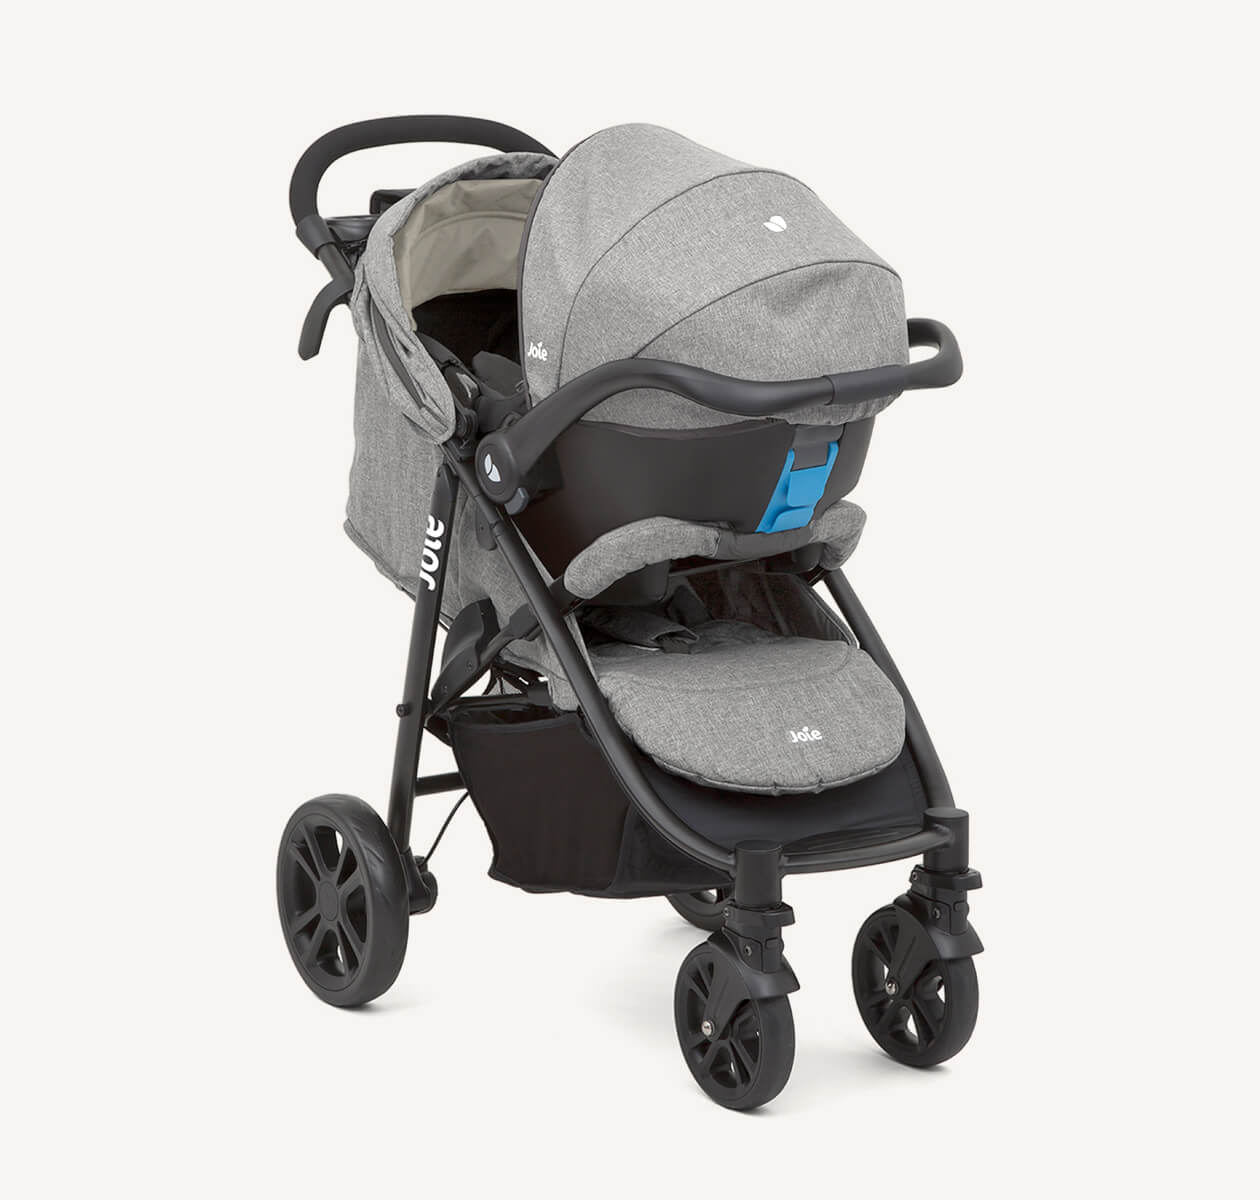  Joie litetrax 4 dlx stroller in gray at an angle. 